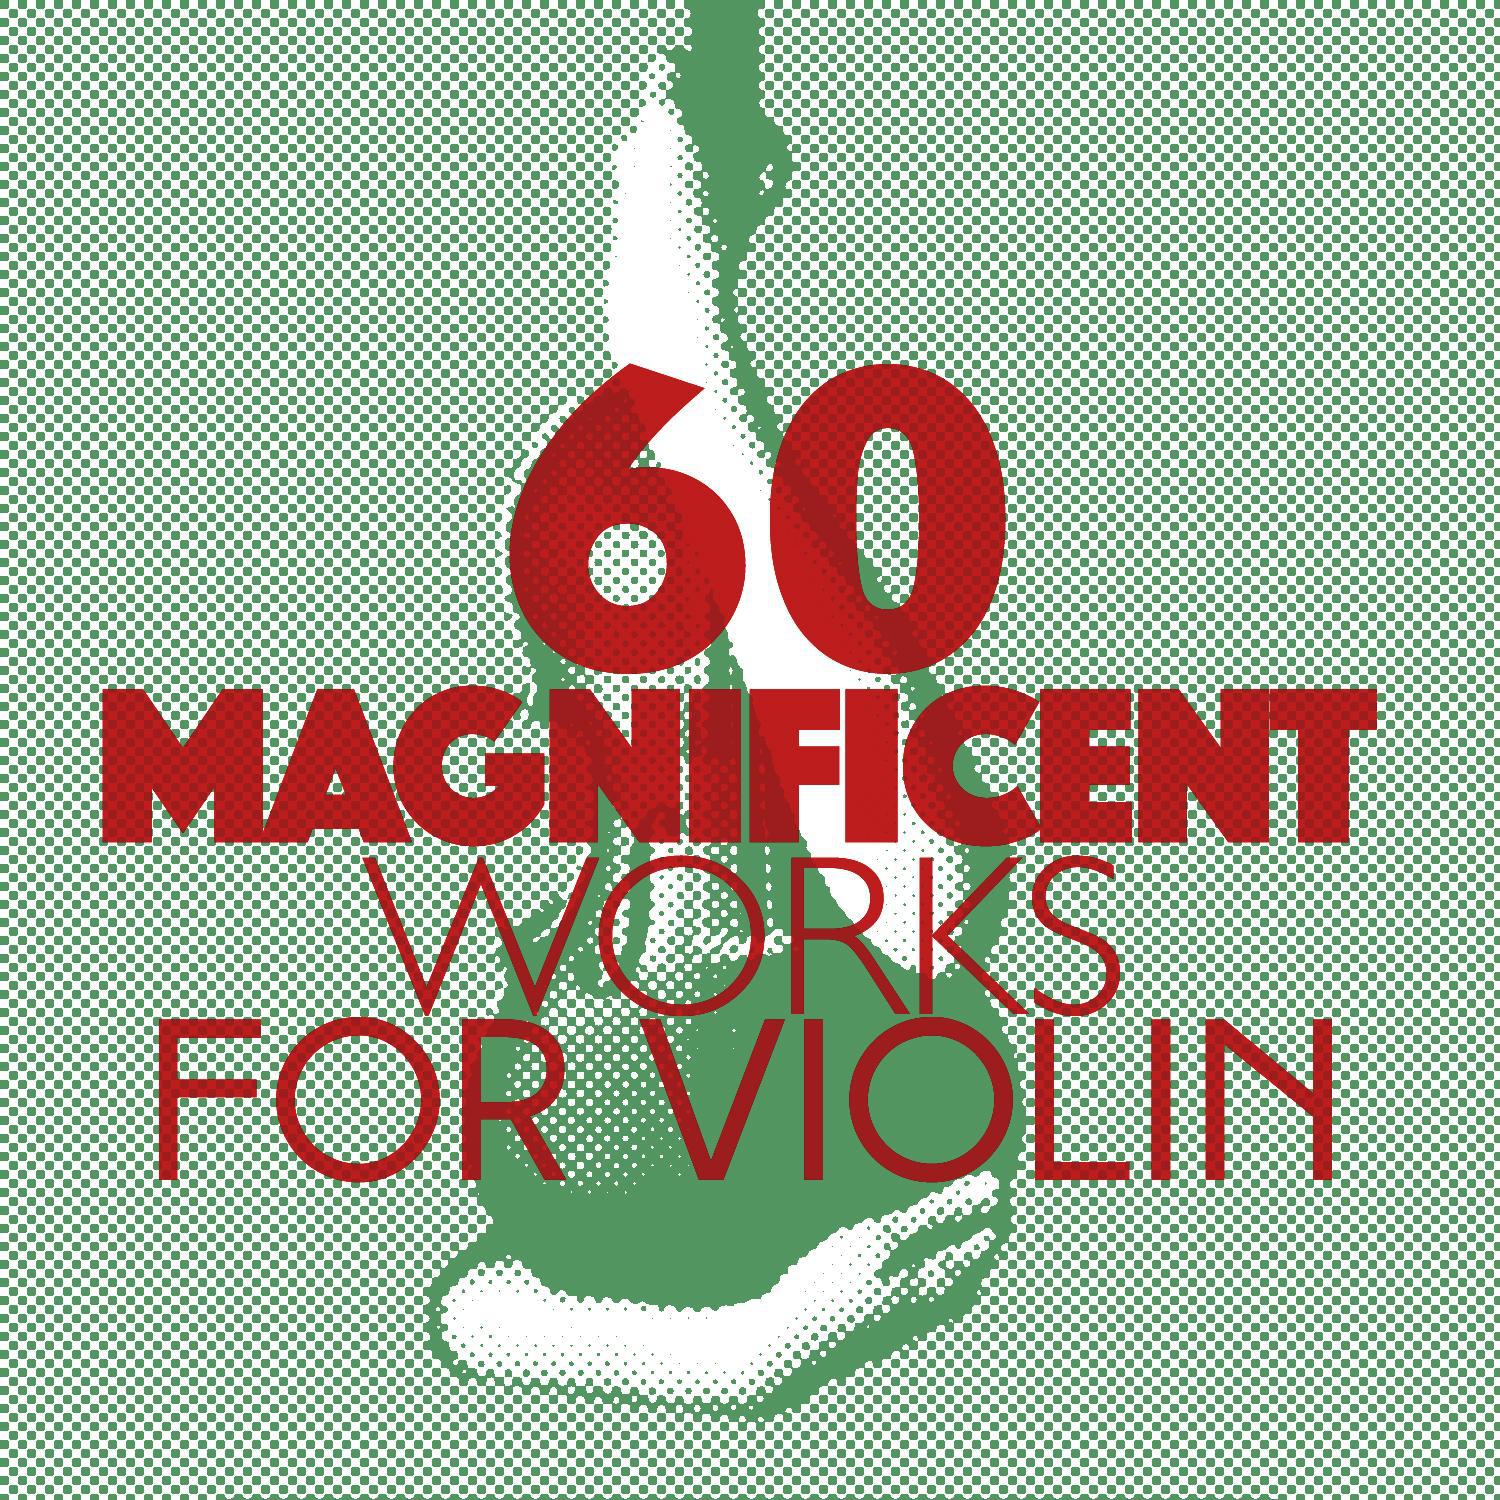 60 Magnificent Works for Violin